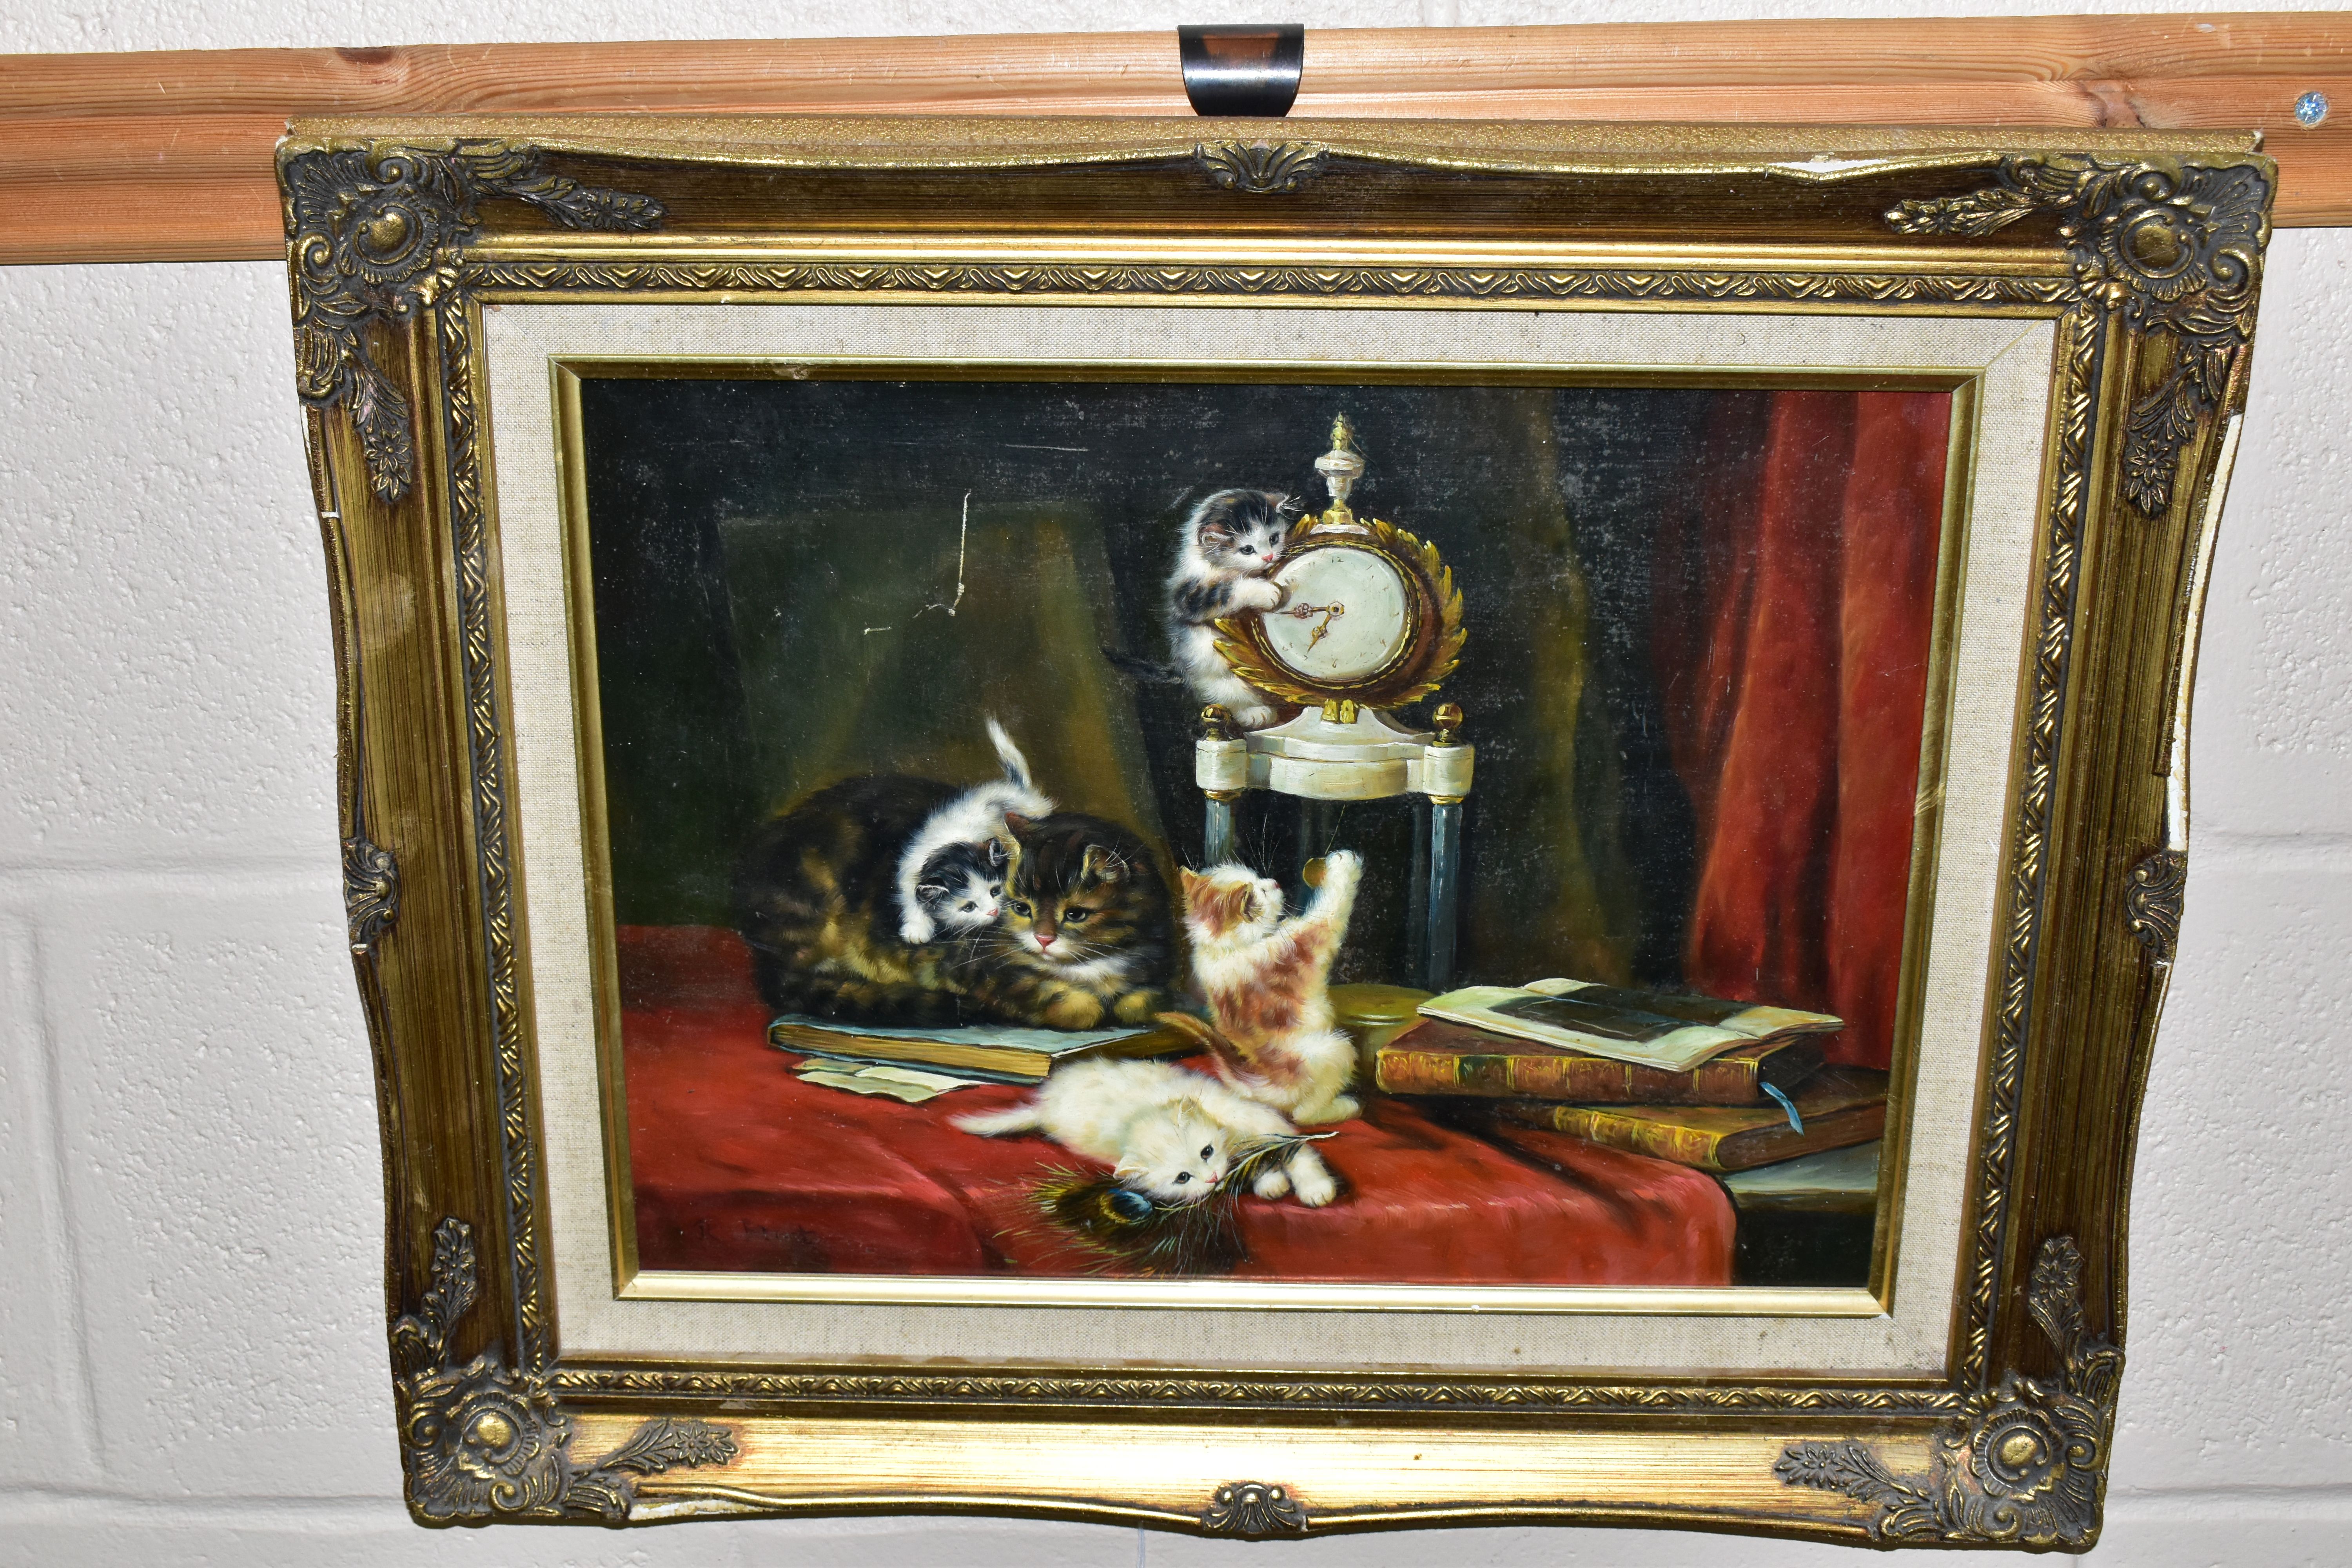 R. FLINT (20TH CENTURY) 'A CAT WITH KITTENS AT PLAY', signed bottom left, oil on wooden panel,